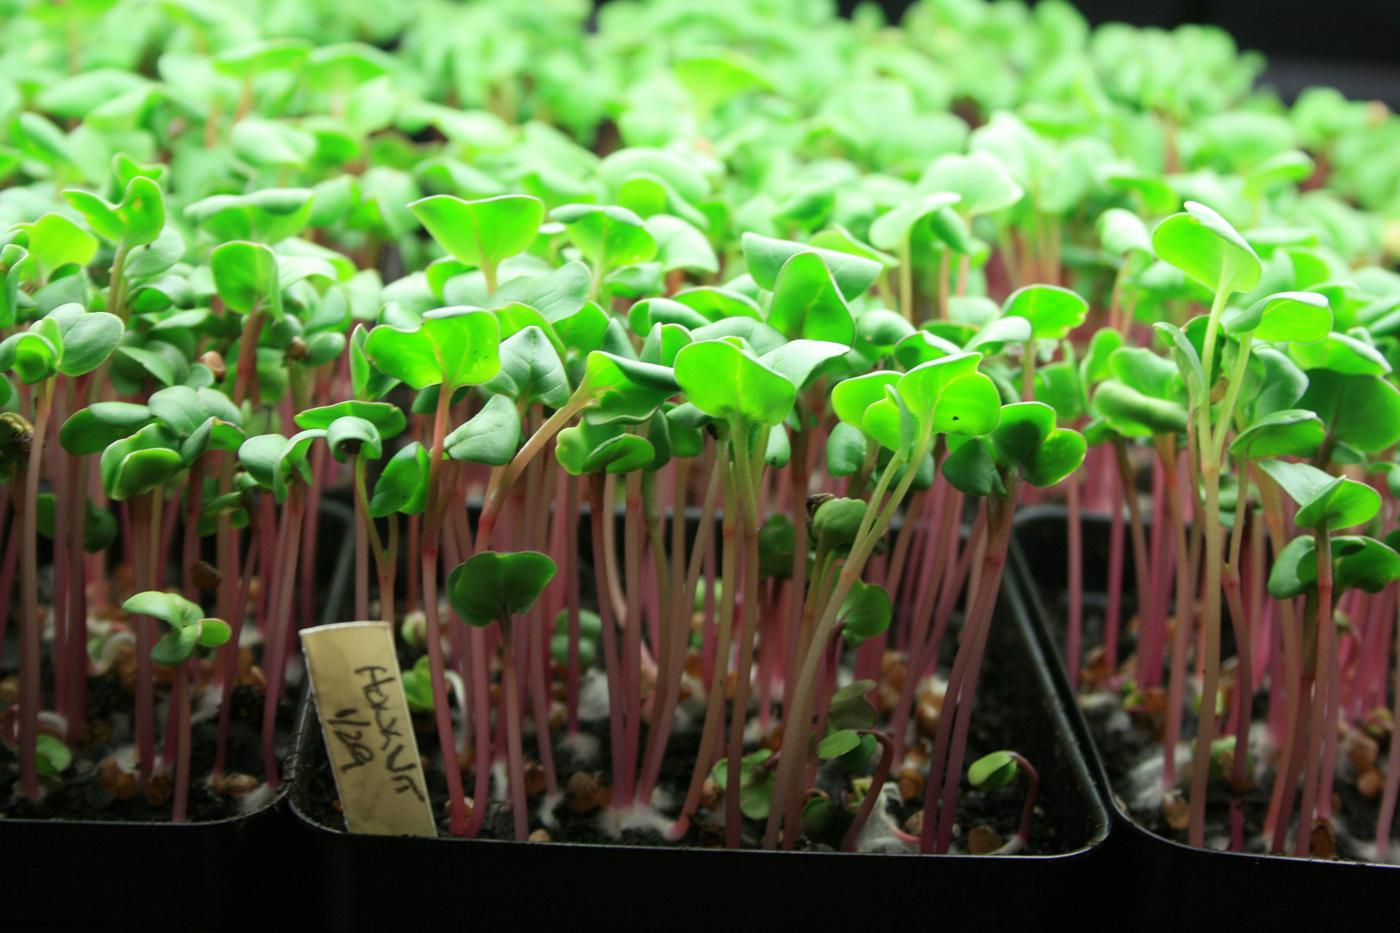 Grow microgreens, such as these Hong Vit radishes, to enjoy winter gardening and keep fresh greens on the table.